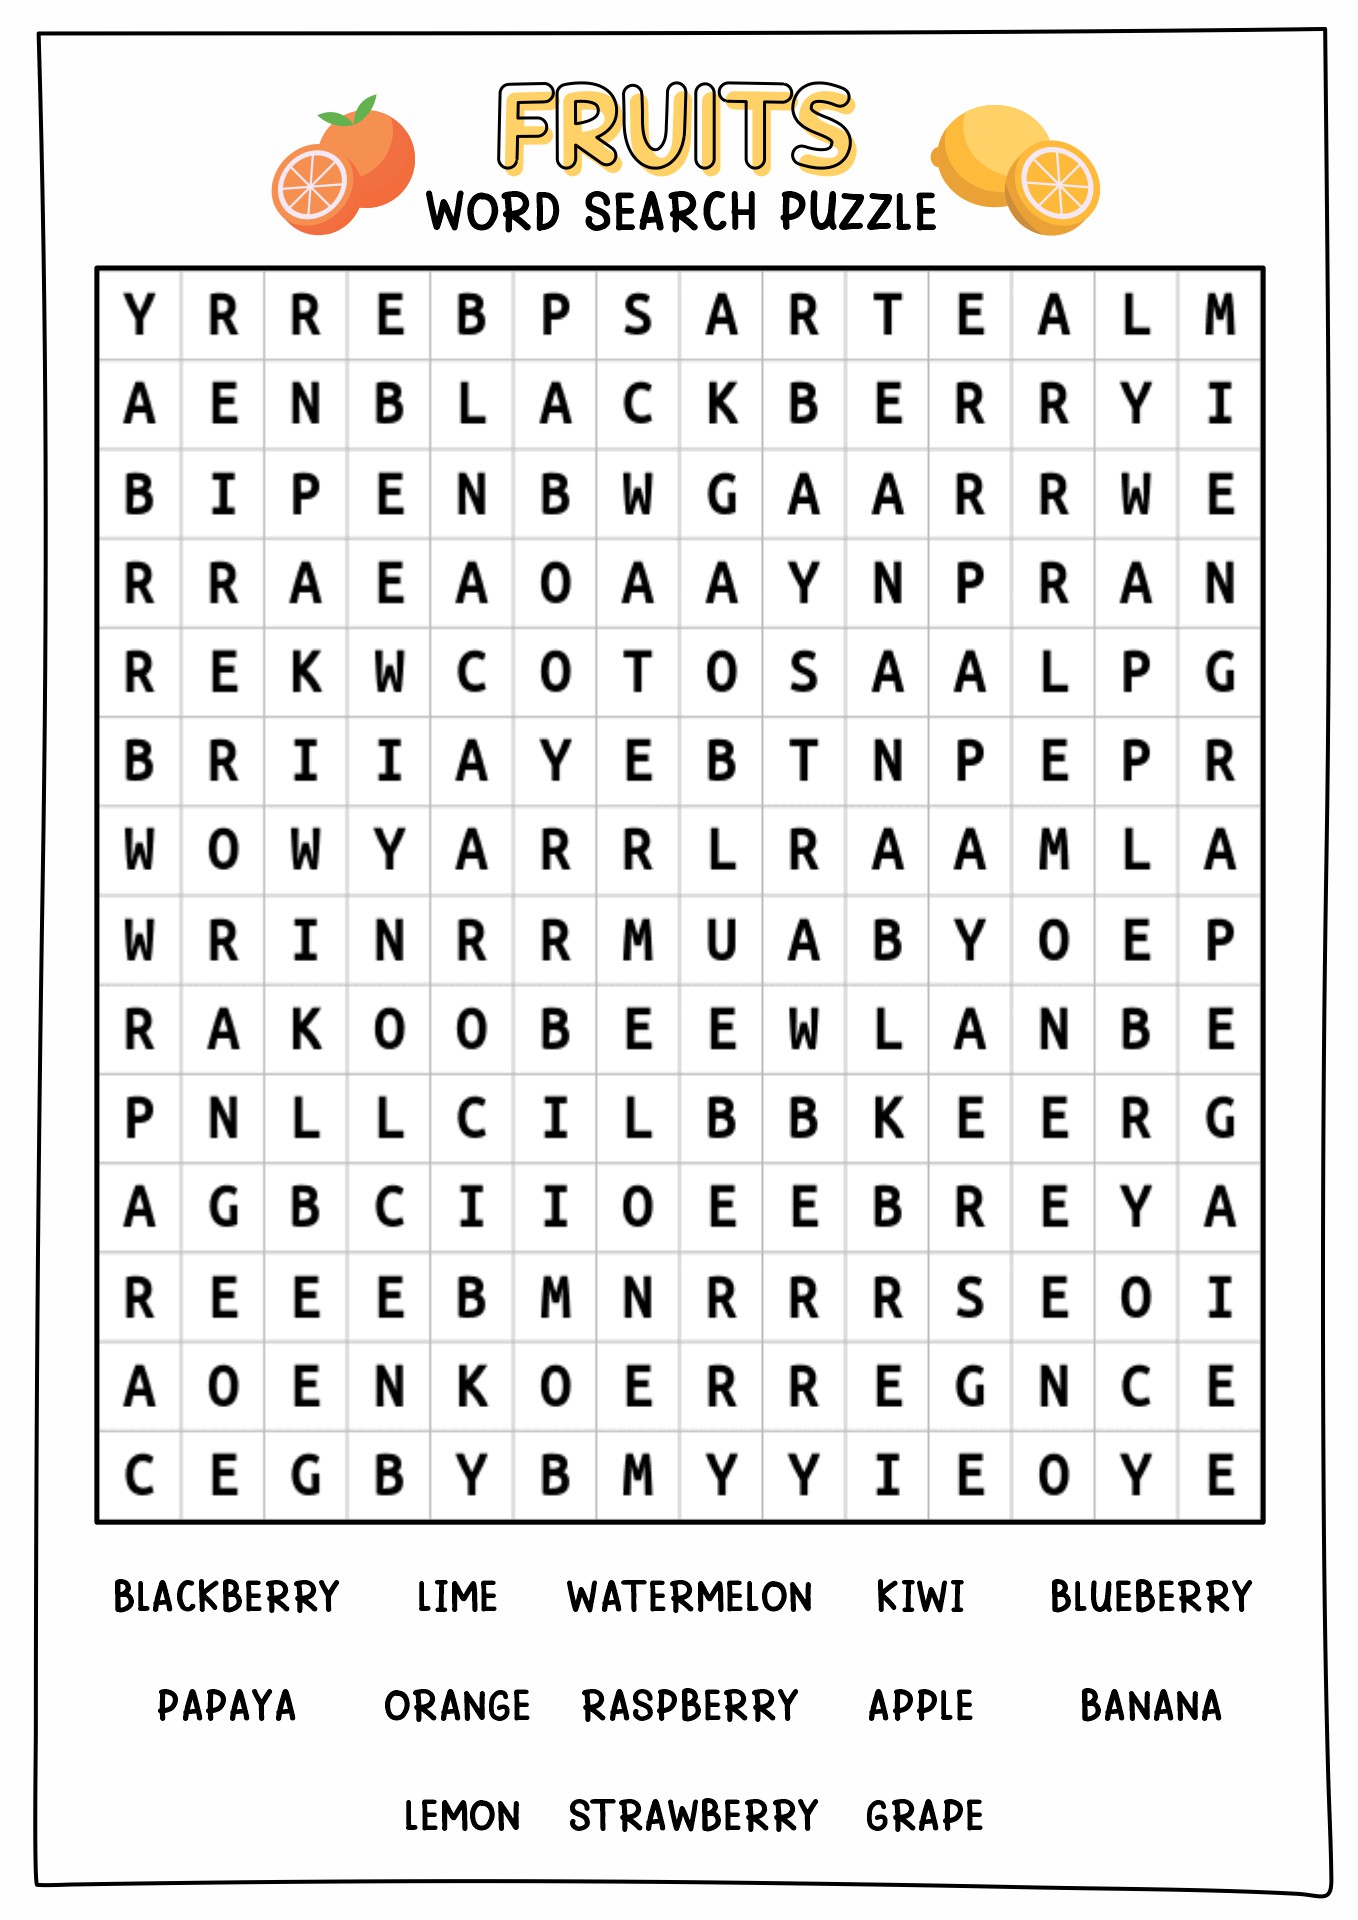 Fruit and Vegetables Word Search Printable Image